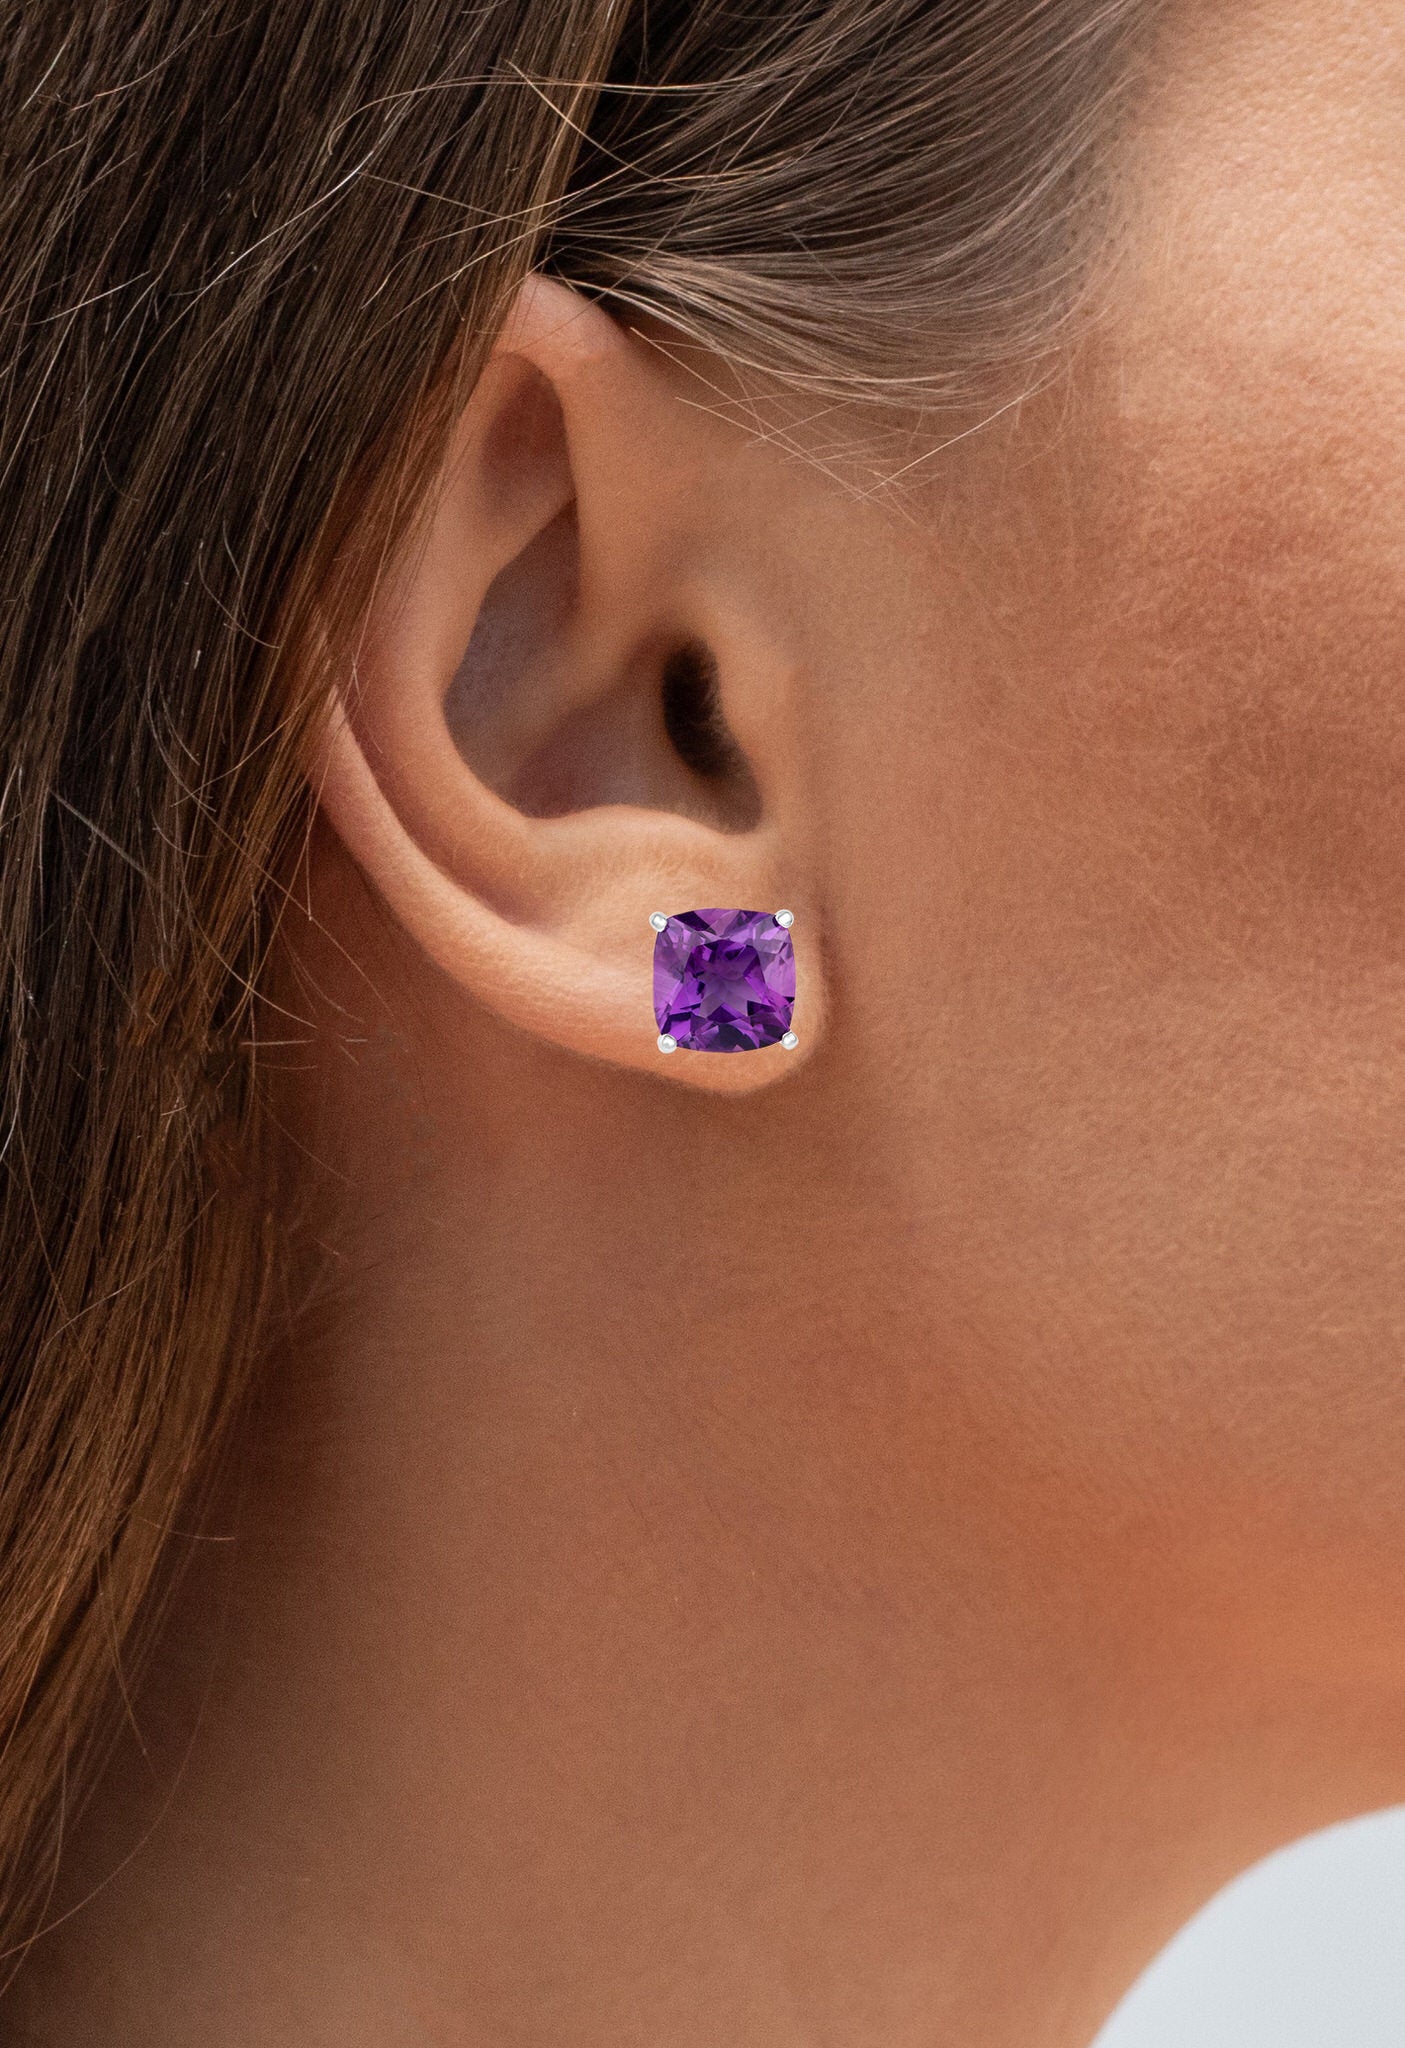 Amethyst Stud Earrings 5.20 Carats Rhodium Plated Sterling Silver